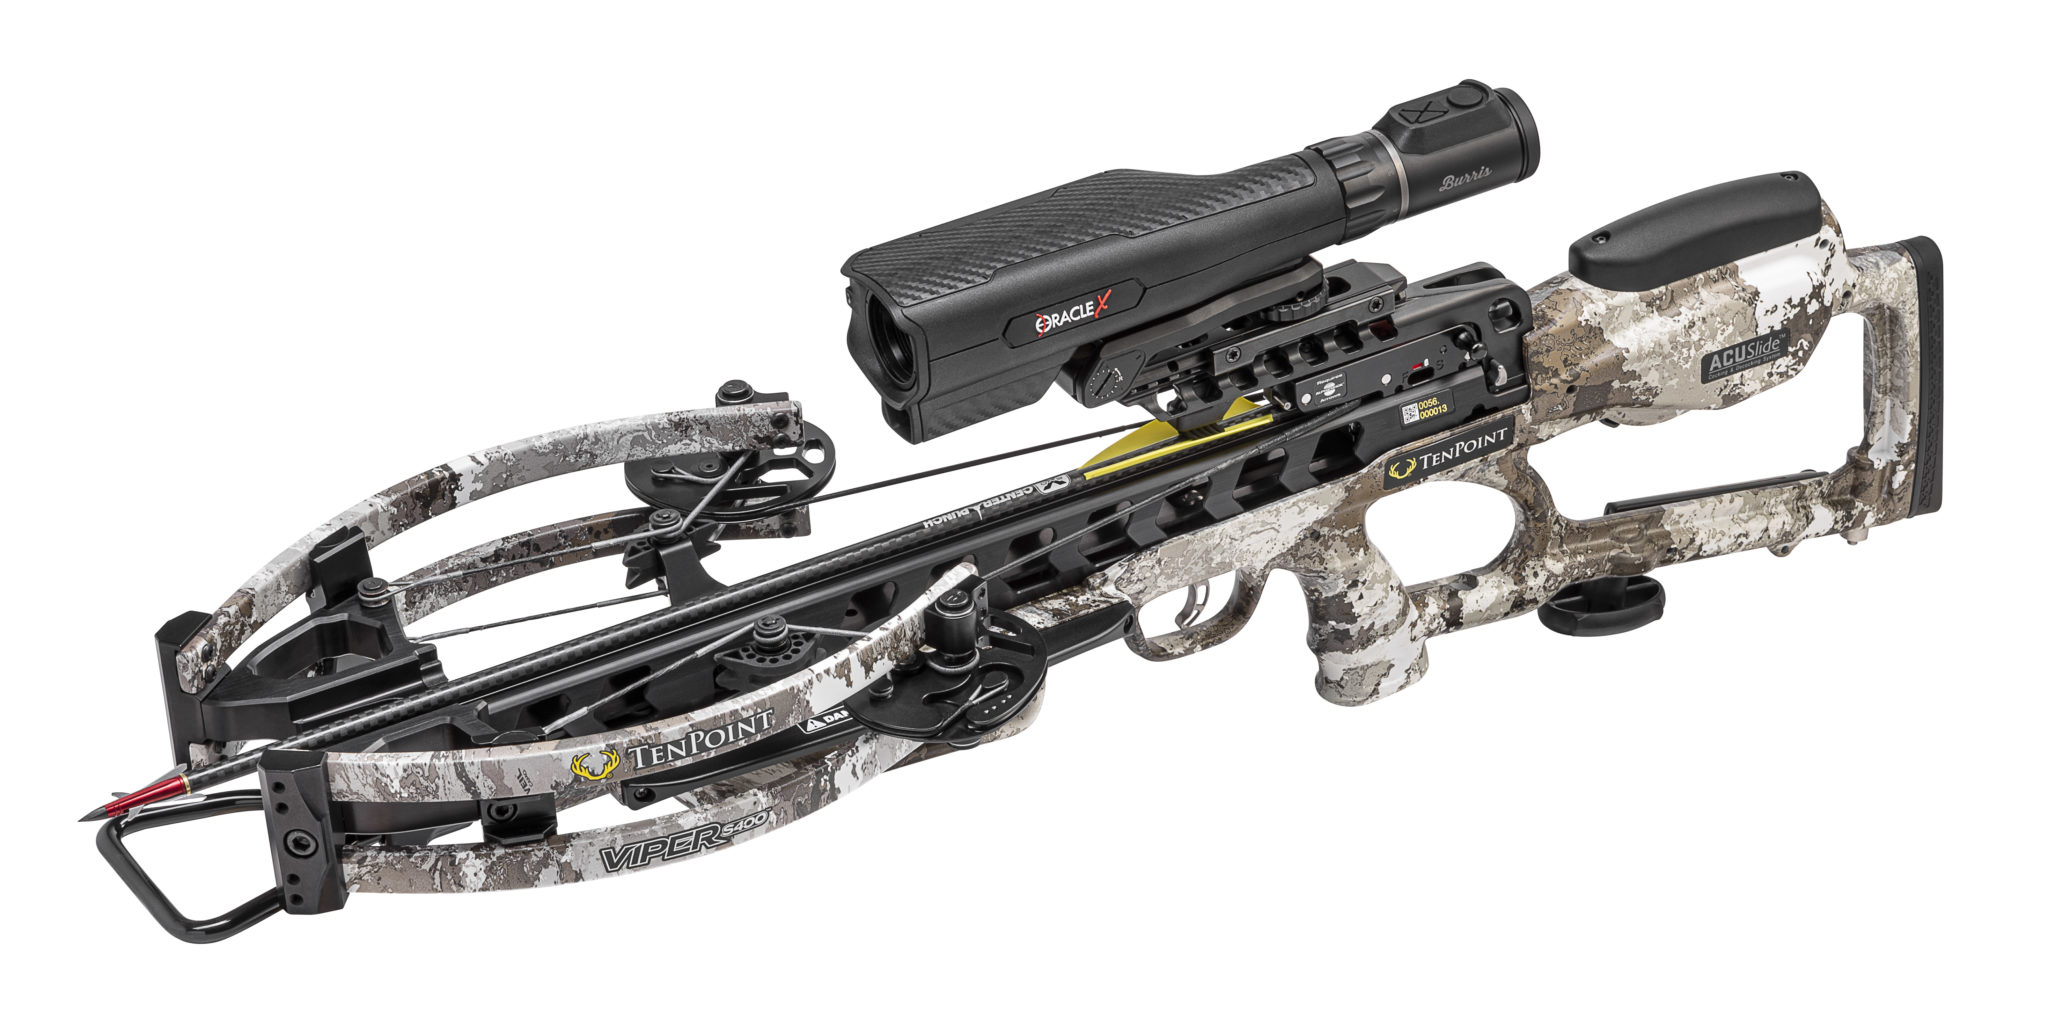 The NEW Oracle X Equipped Viper S400 Crossbow from TenPoint